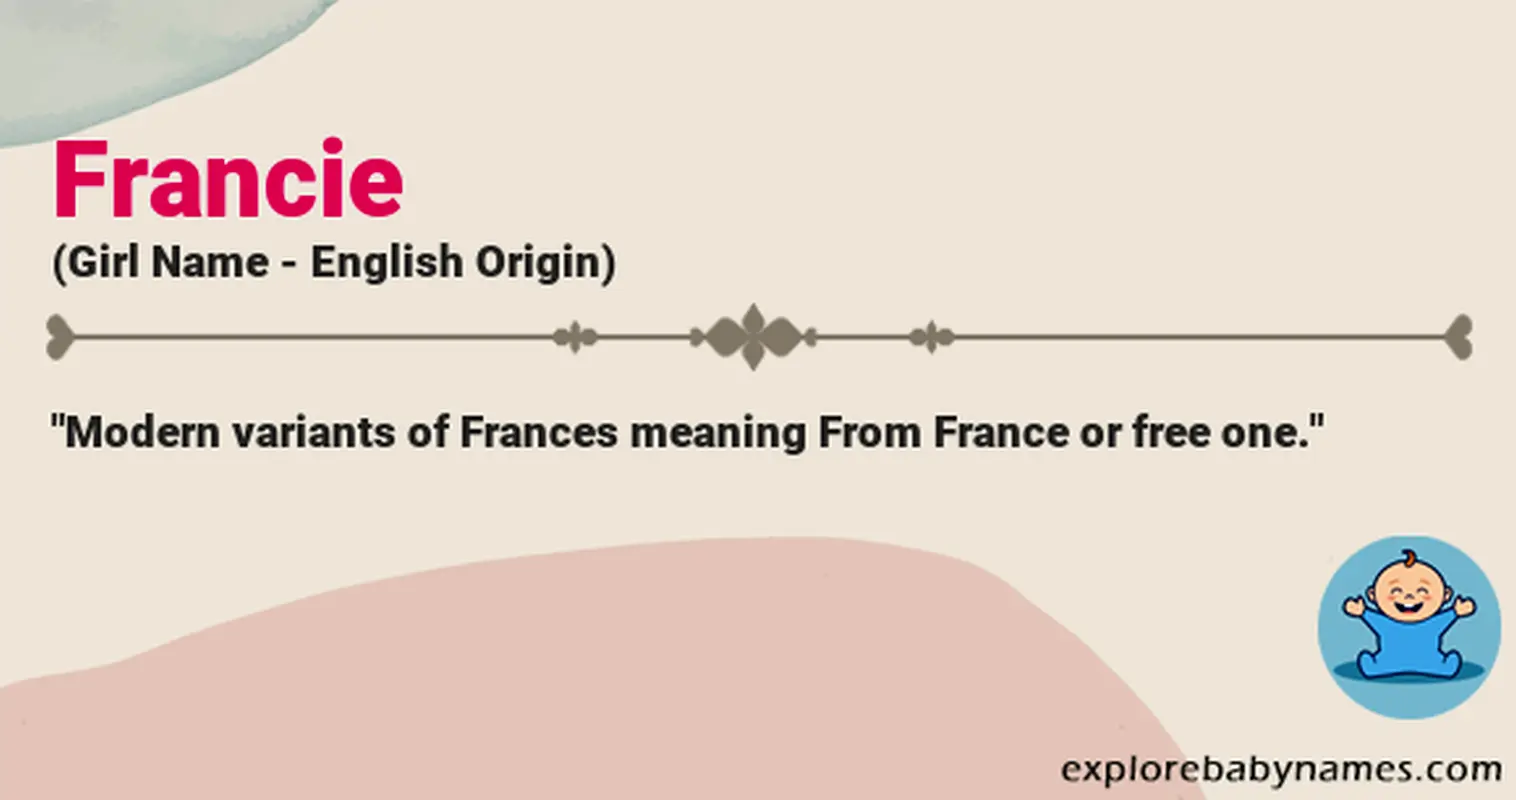 Meaning of Francie